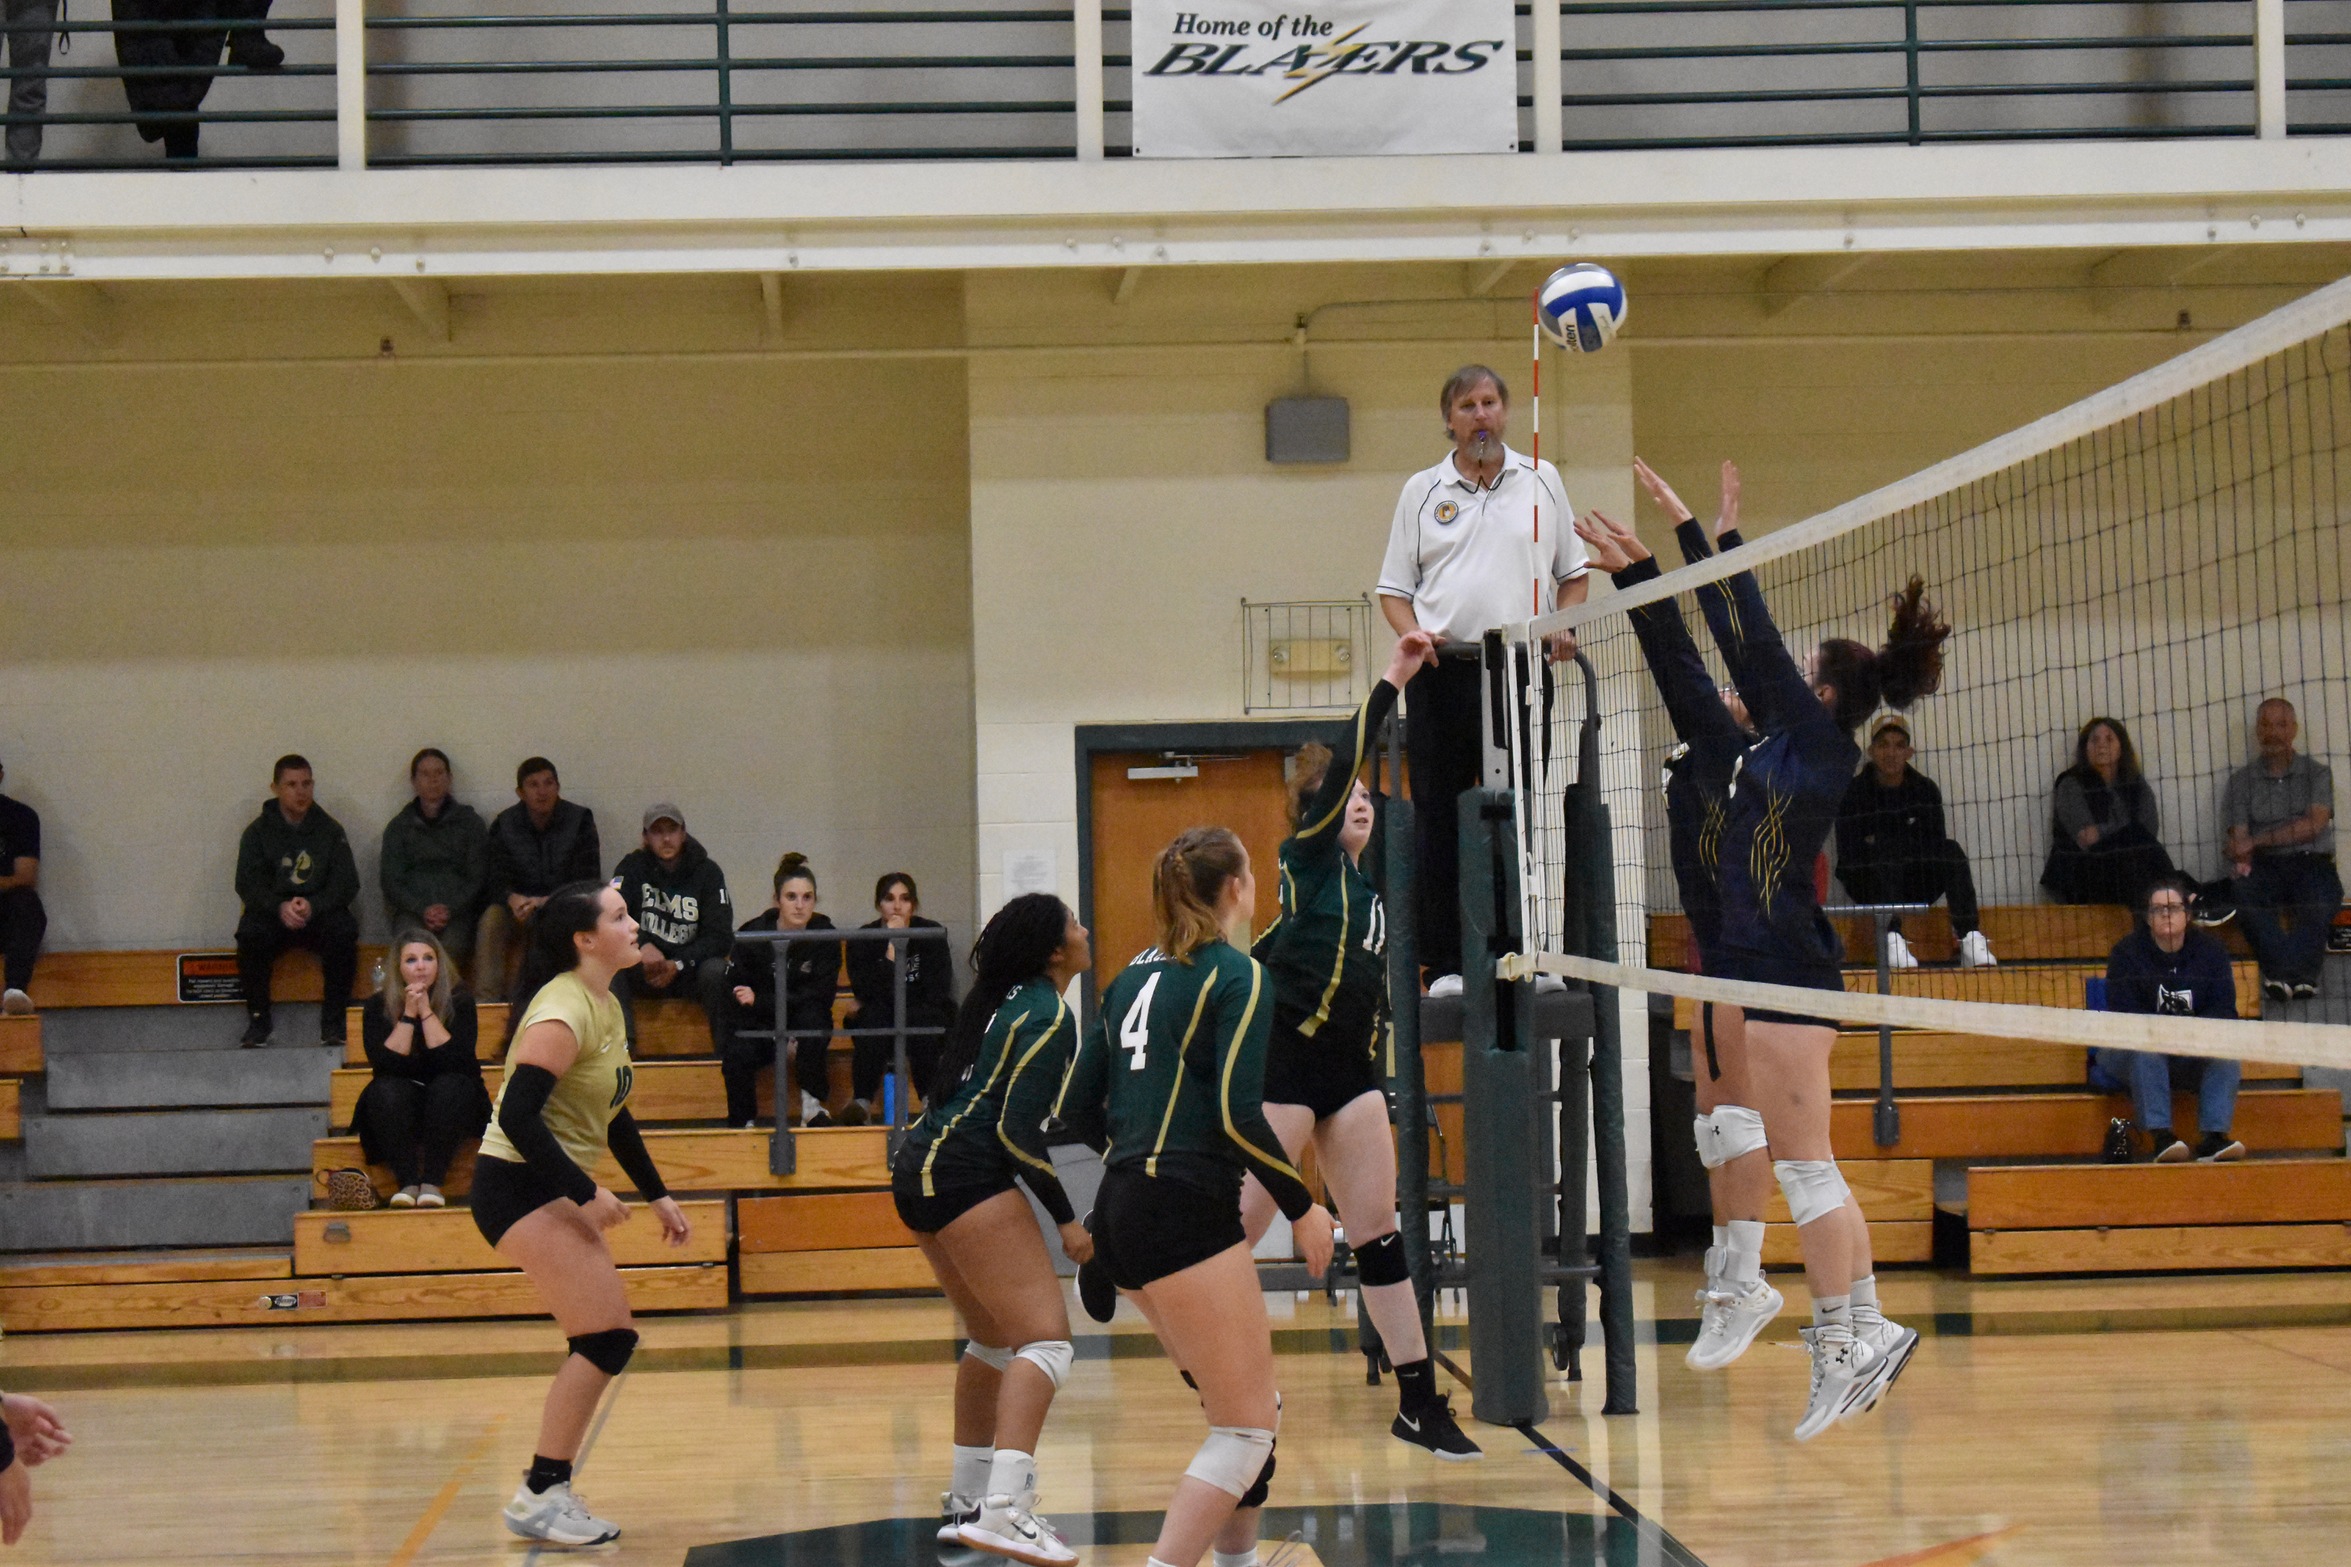 Women's Volleyball Storms Blue Jays